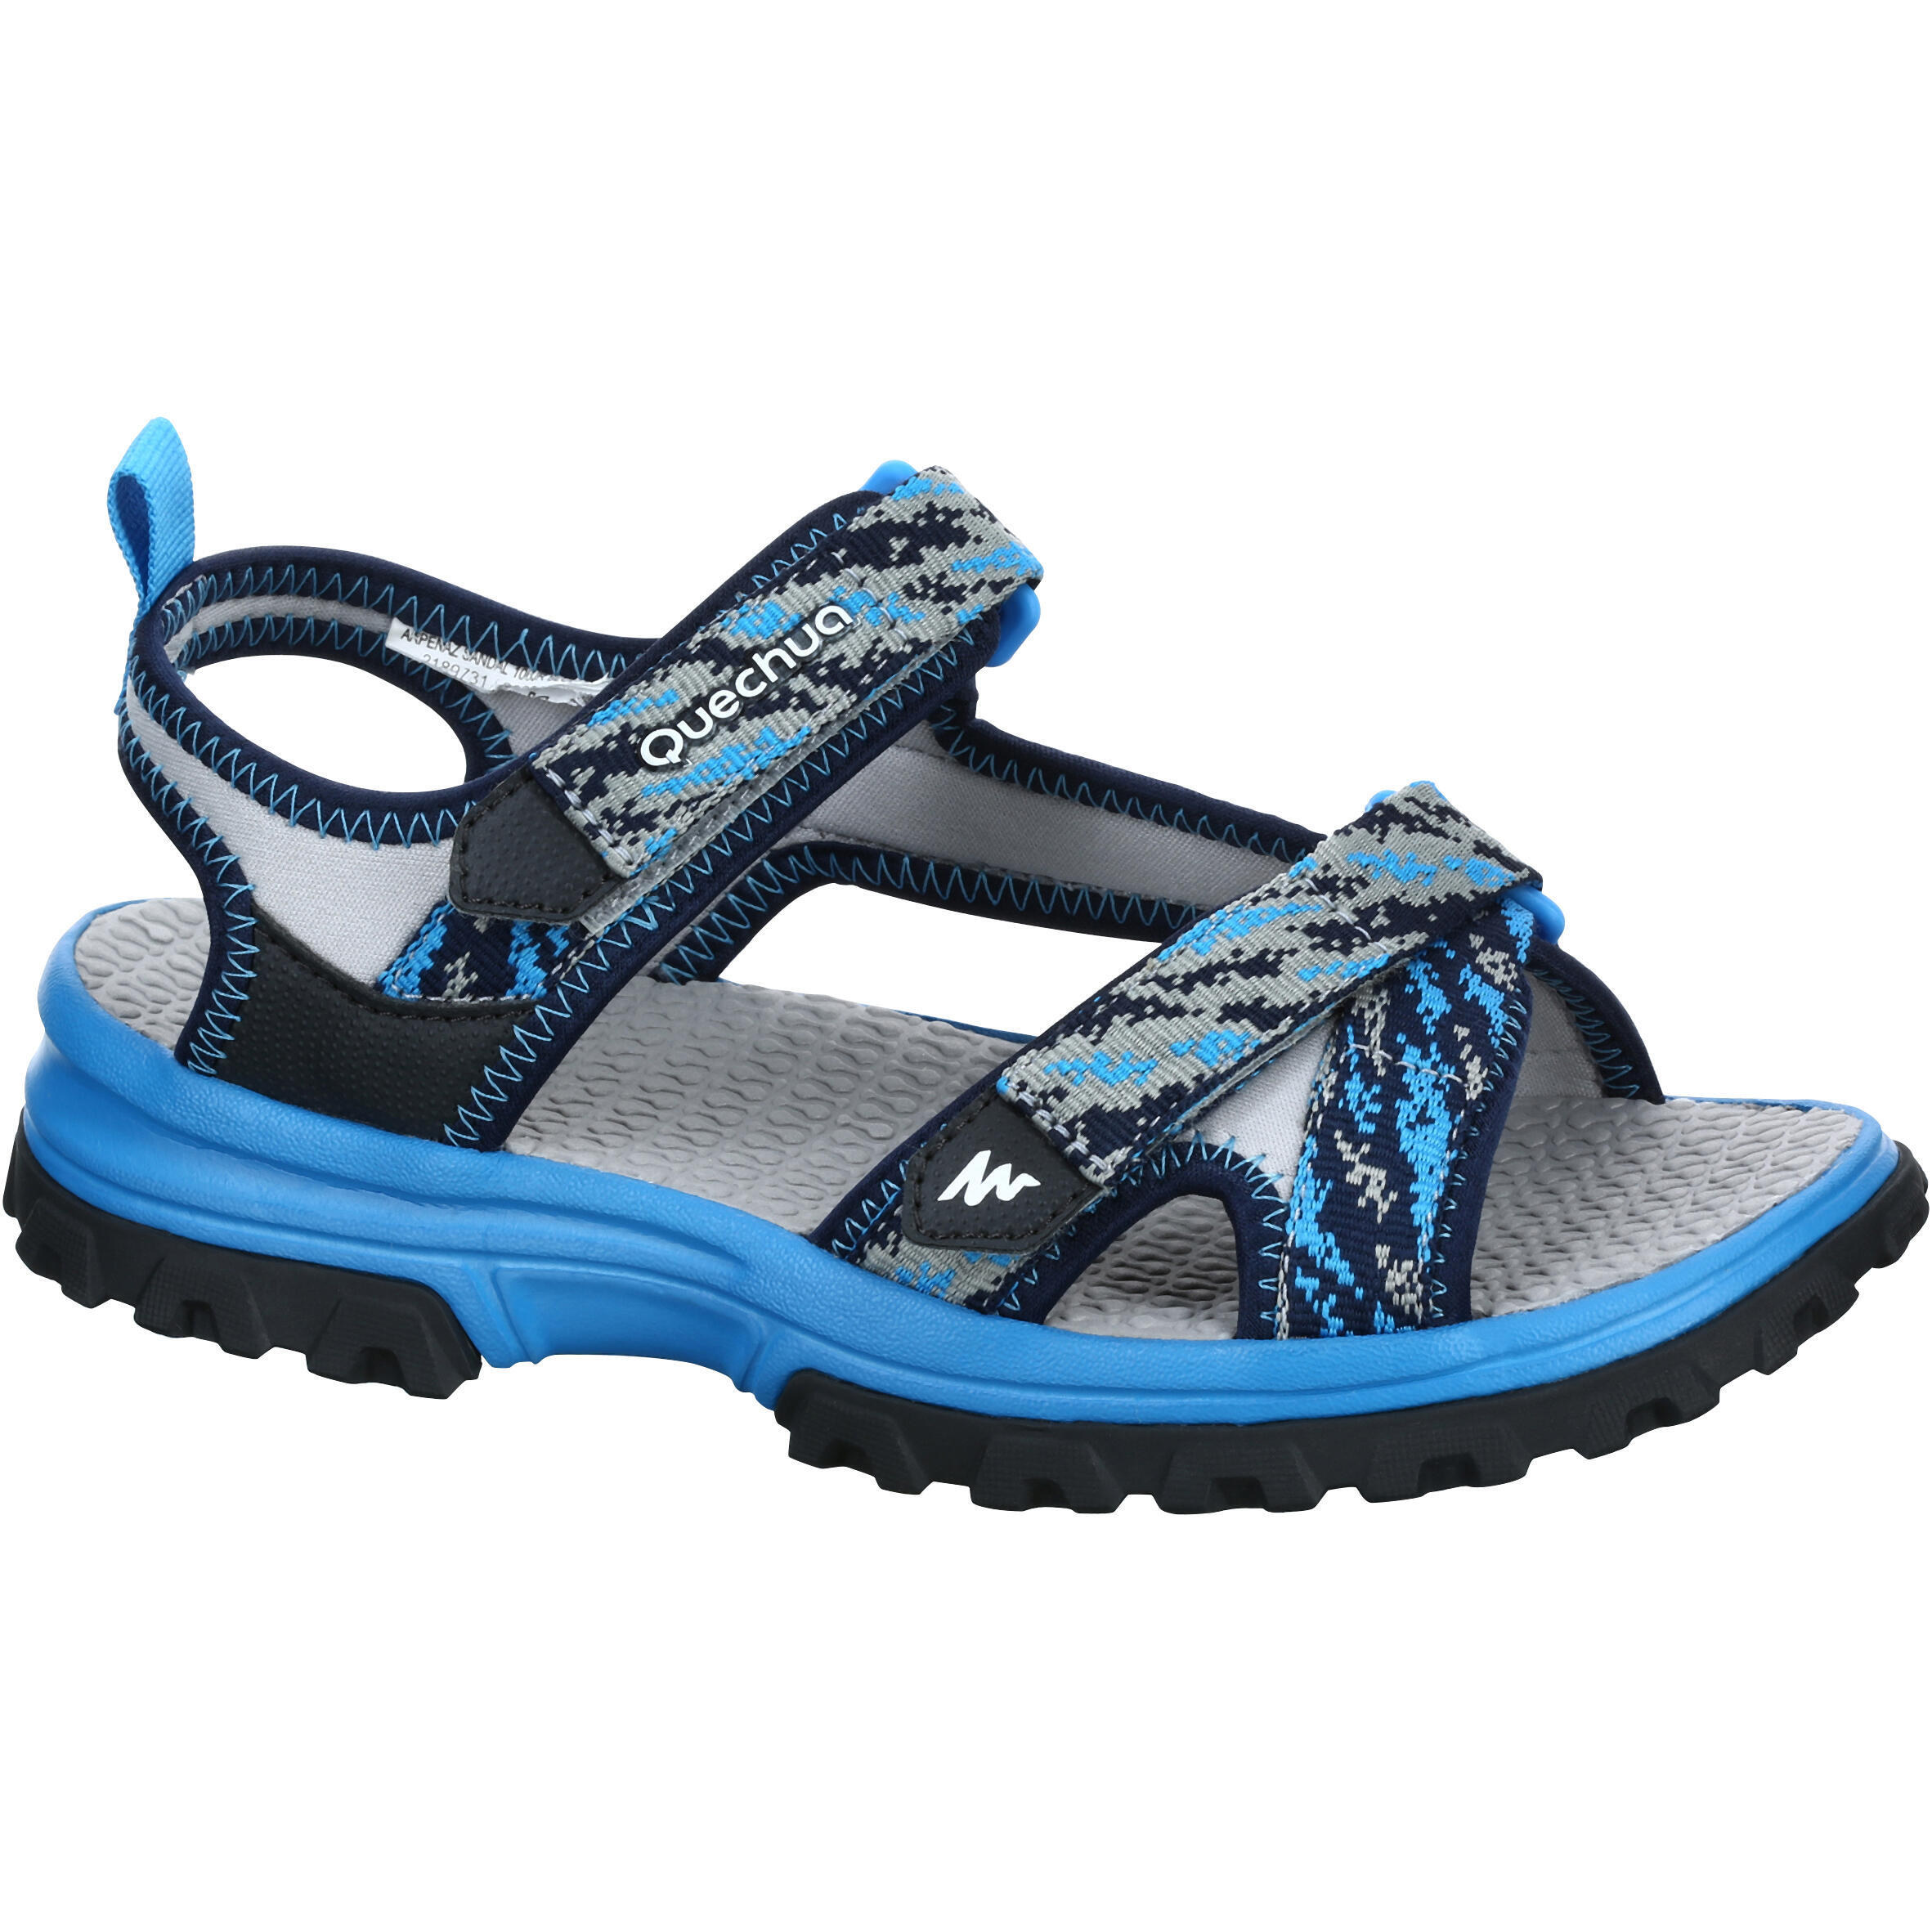 Kids’ Hiking Sandals MH120 TW  - Jr size 10 TO Adult size 6 - Blue 1/7